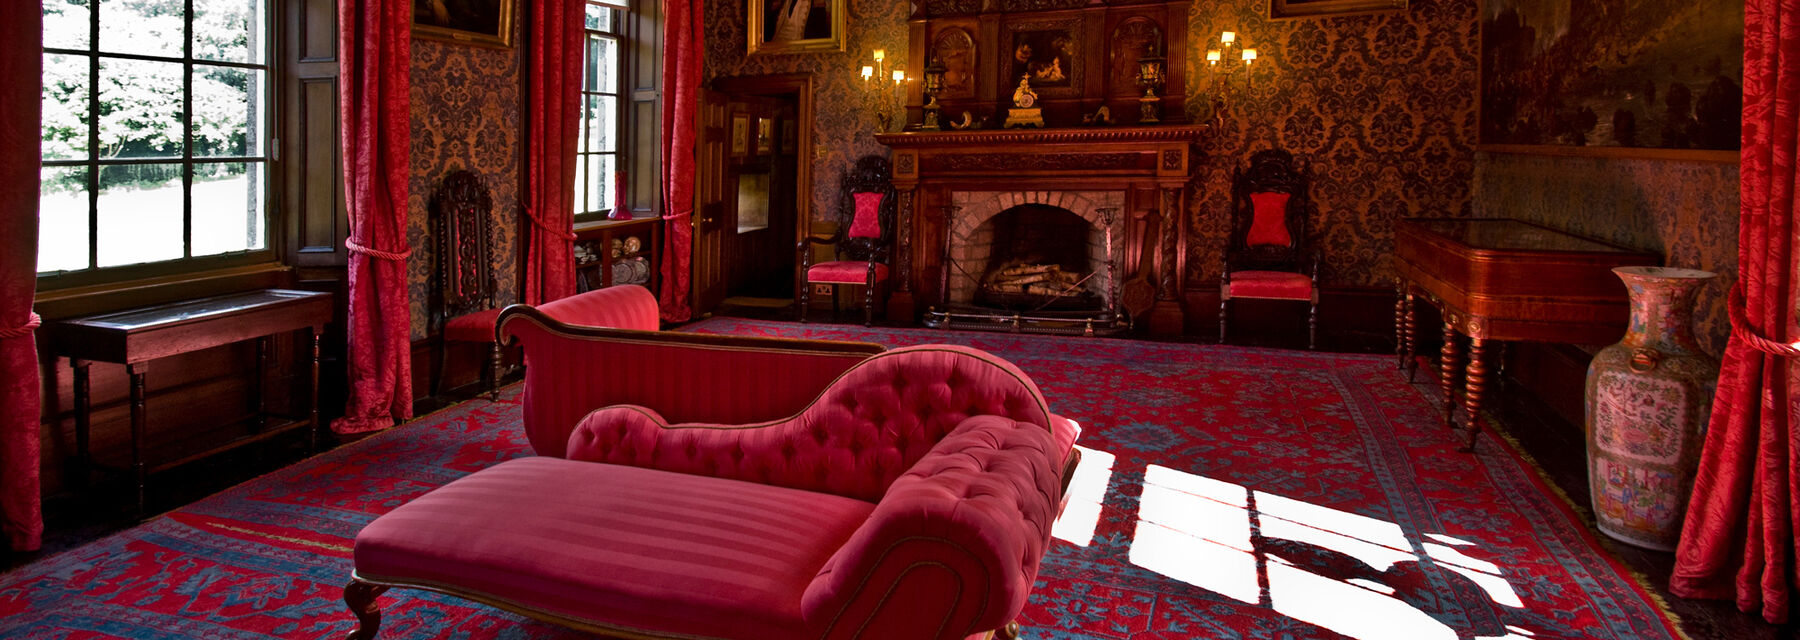 A view of a grand drawing room, with many red furnishings. Oil paintings hang on the patterned walls.